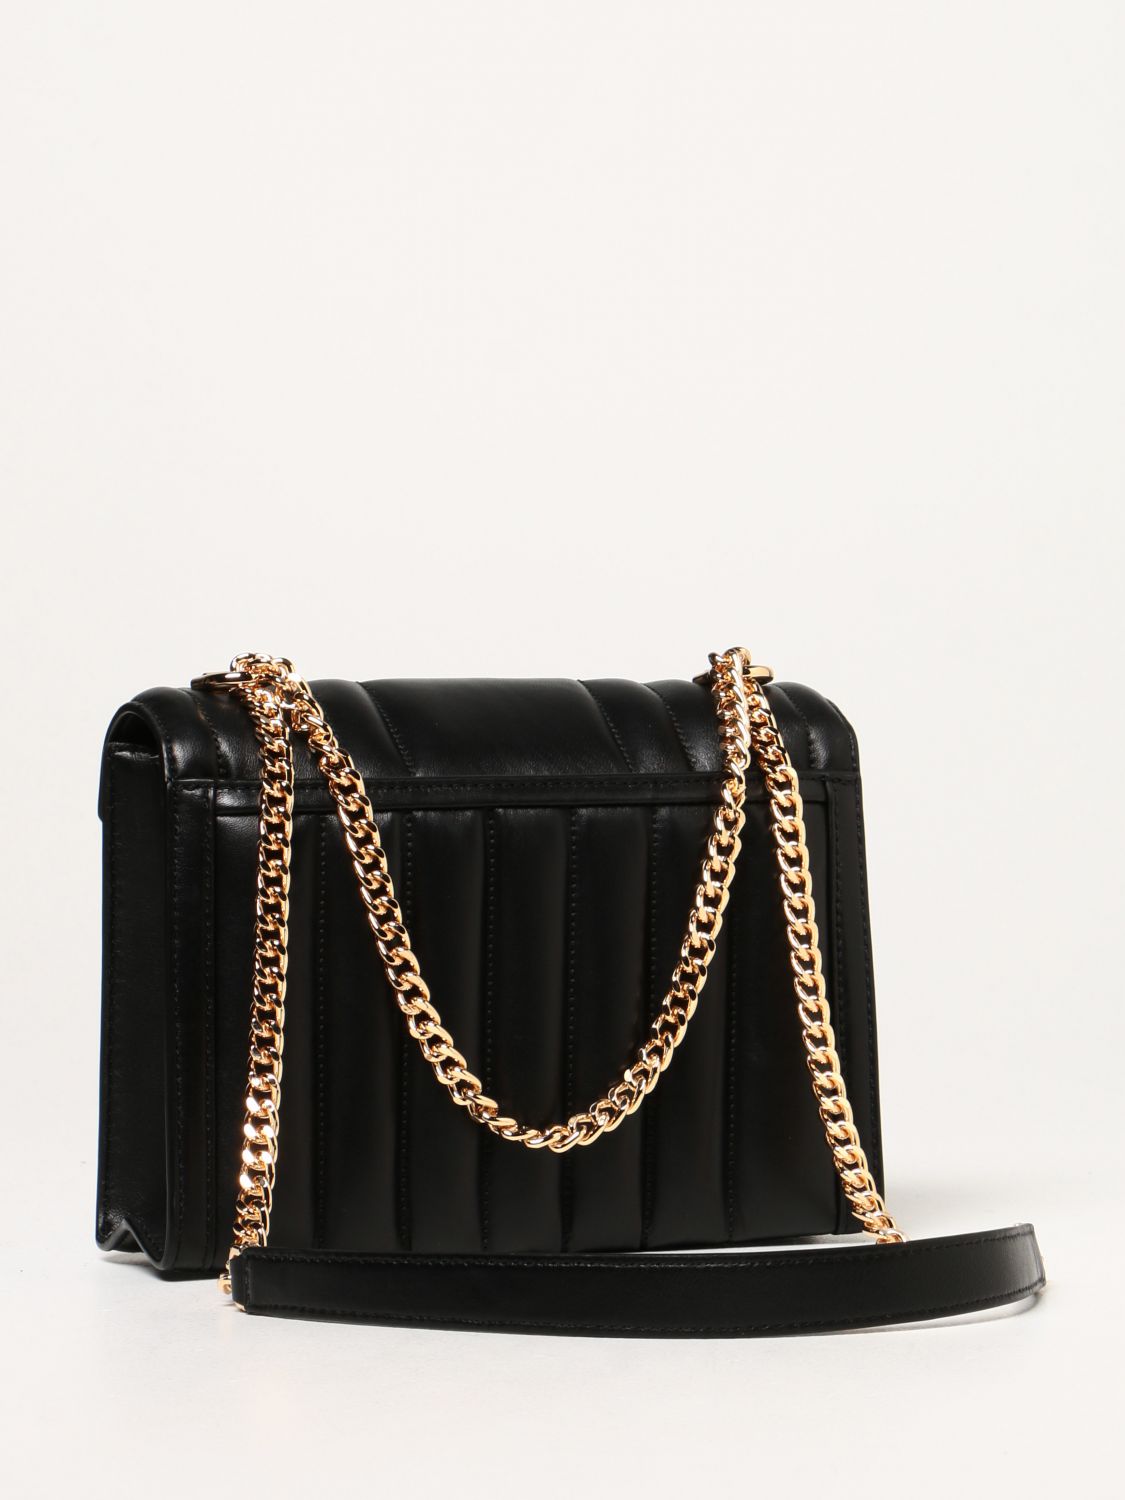 MICHAEL KORS: Whitney Michael bag in quilted leather - Black ...